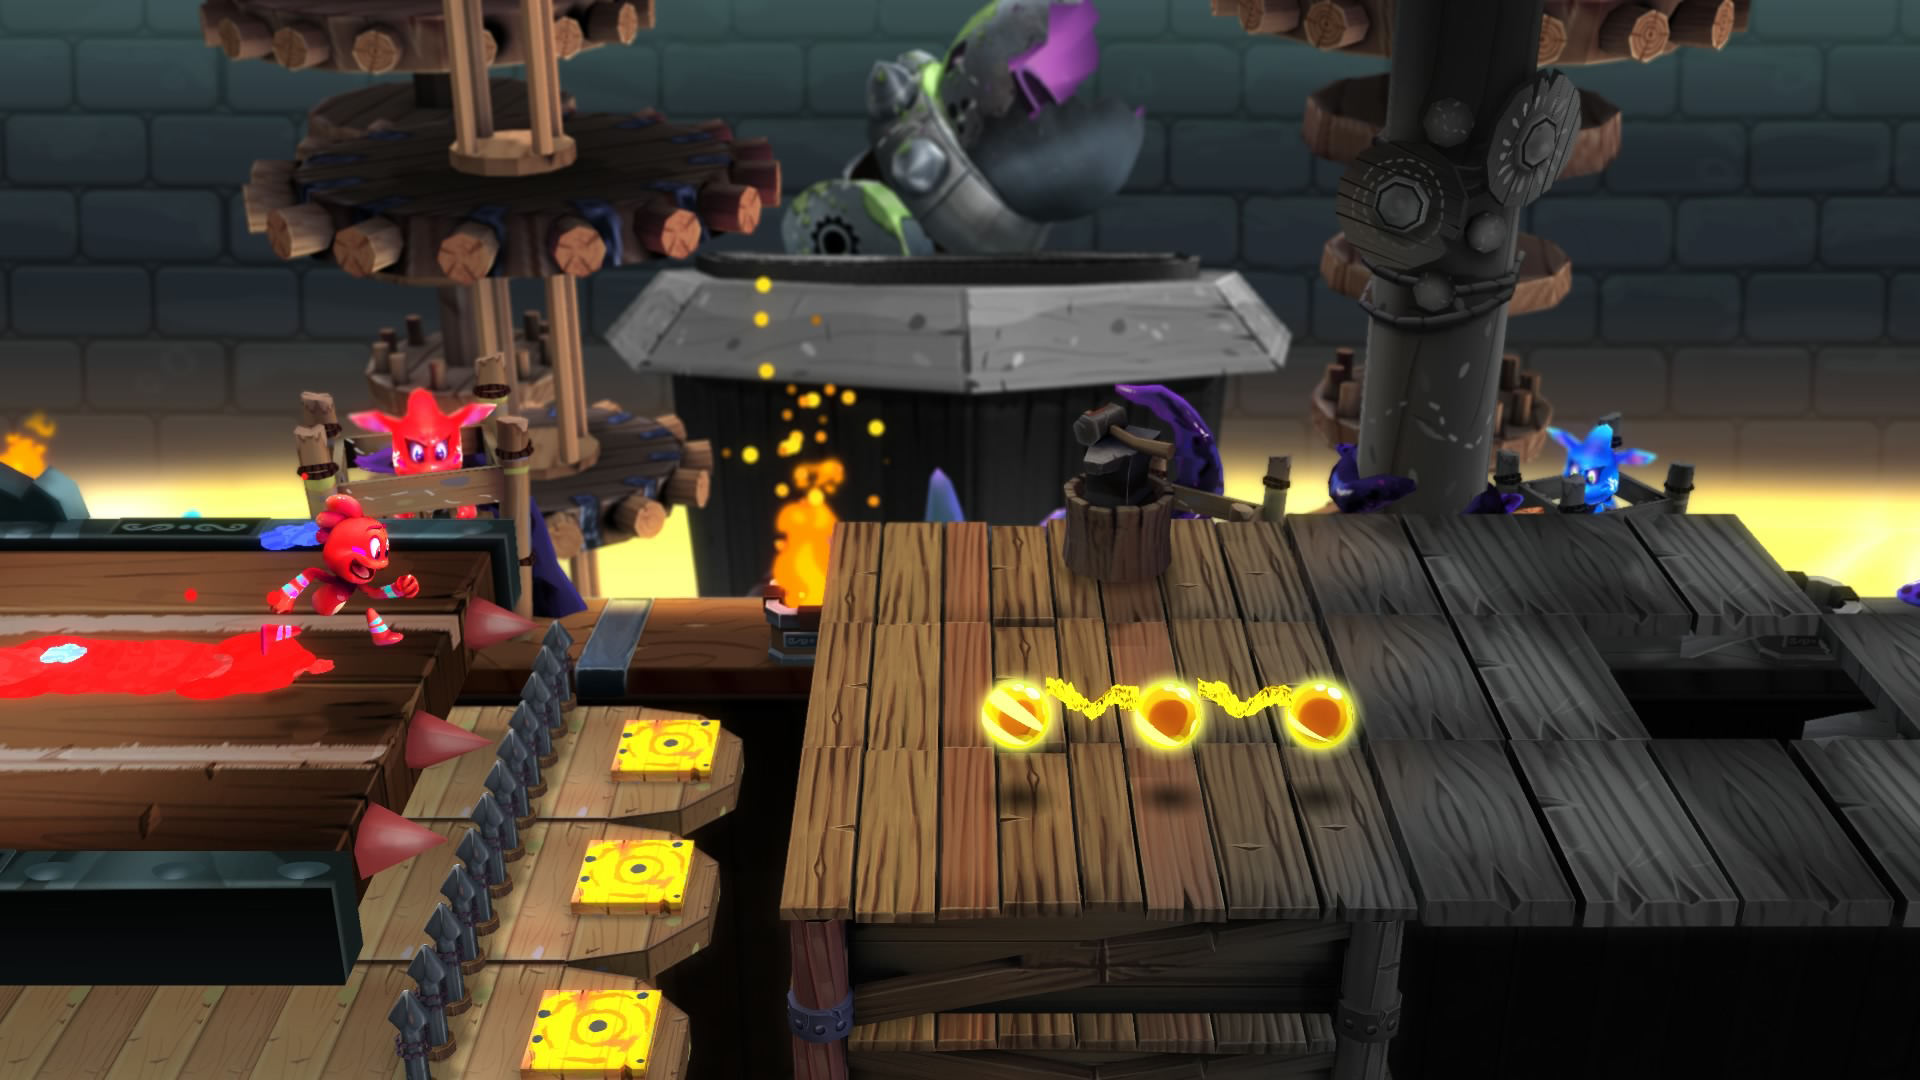 GDC 2015: Hands on With Color Guardians